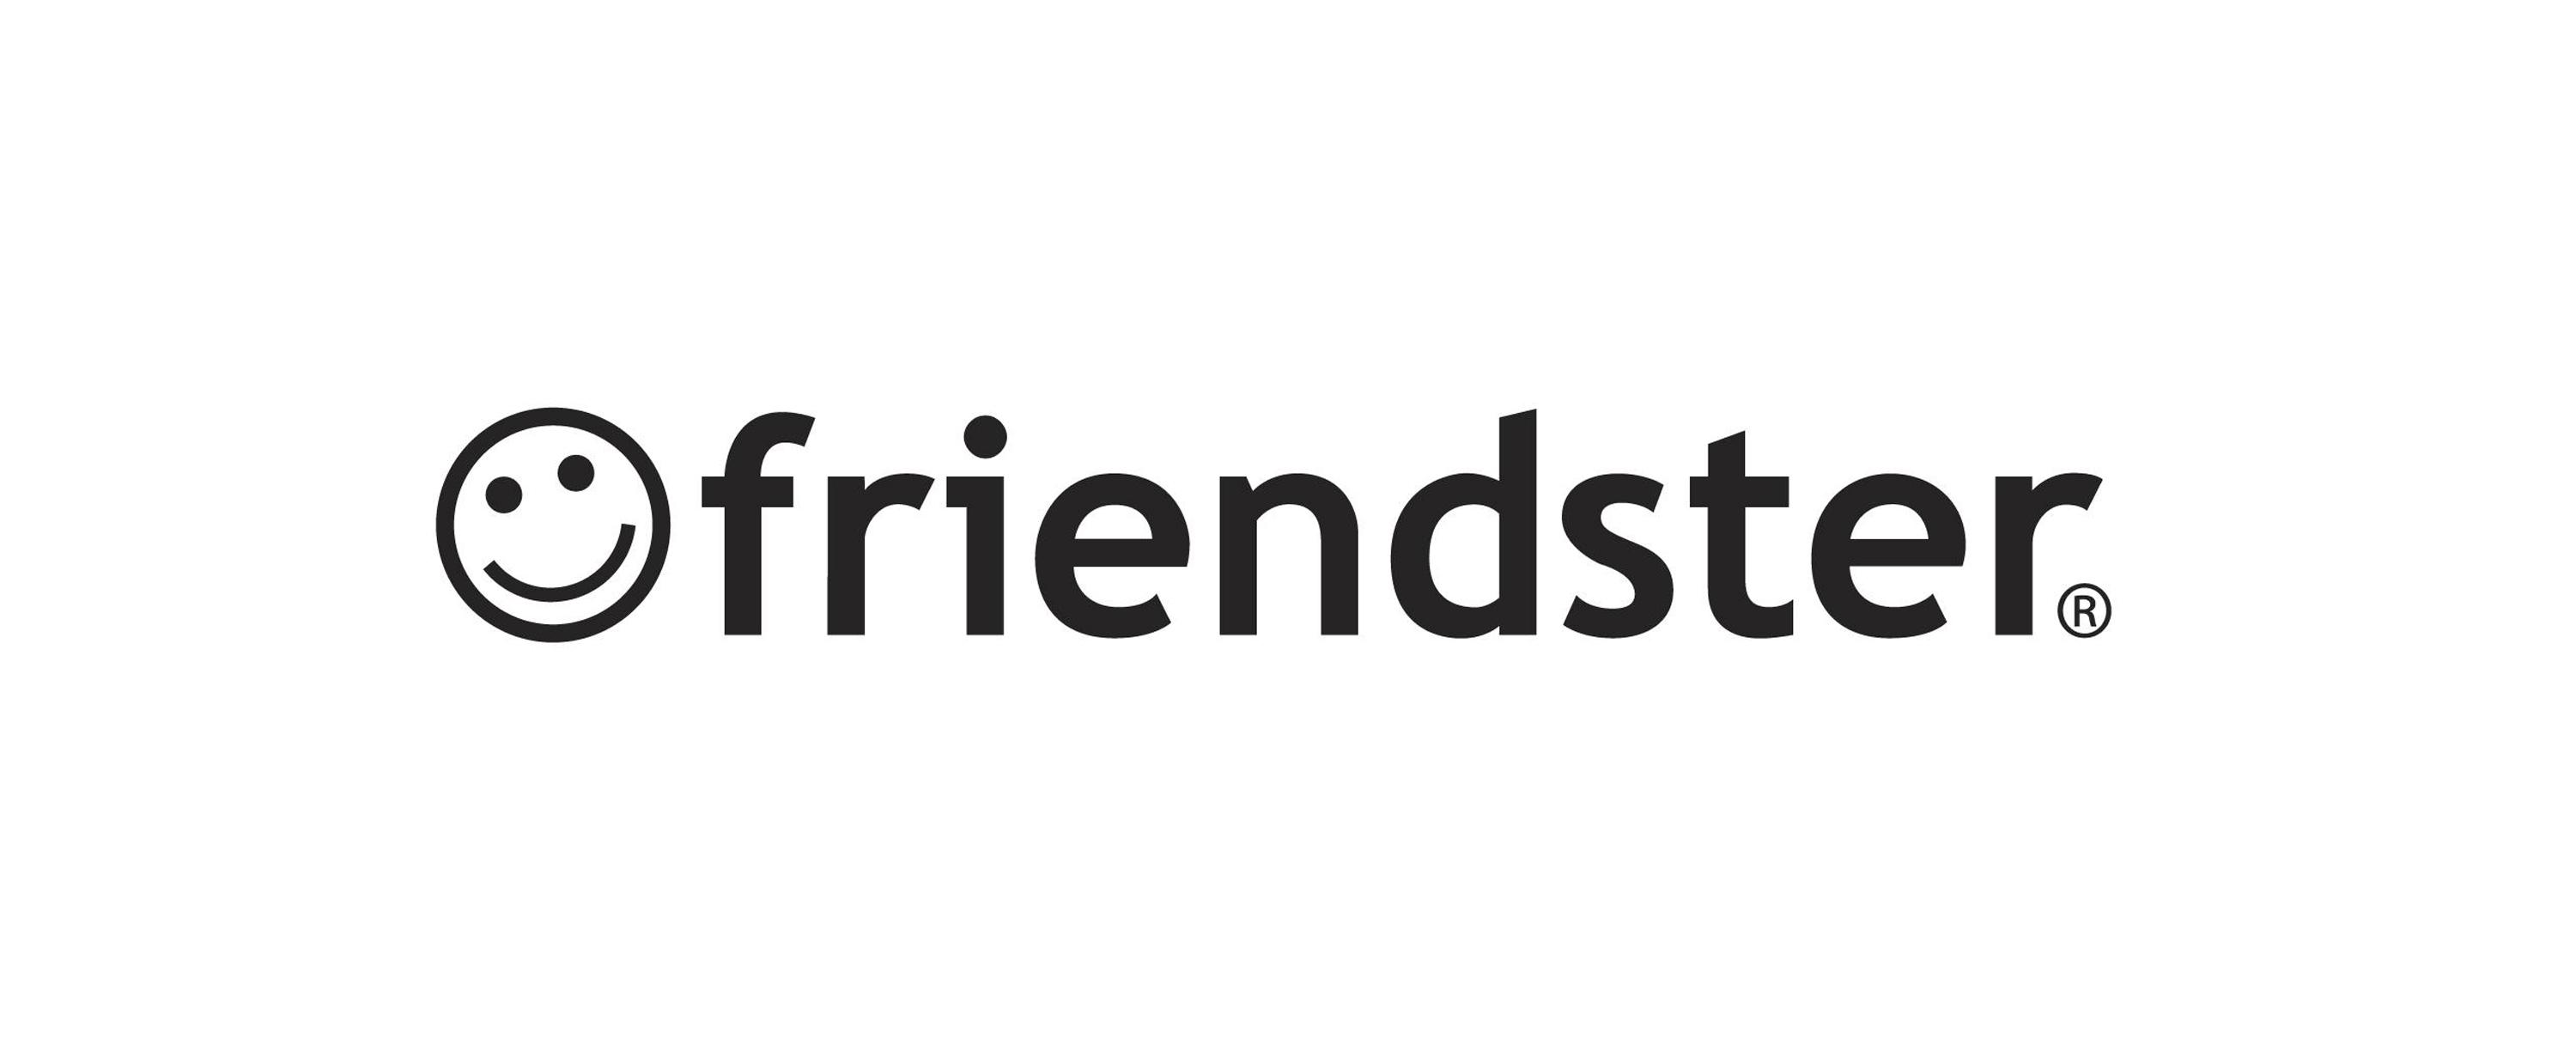 Friendster Logo - Remembering Friendster: Asia's Social Networking Grandfather